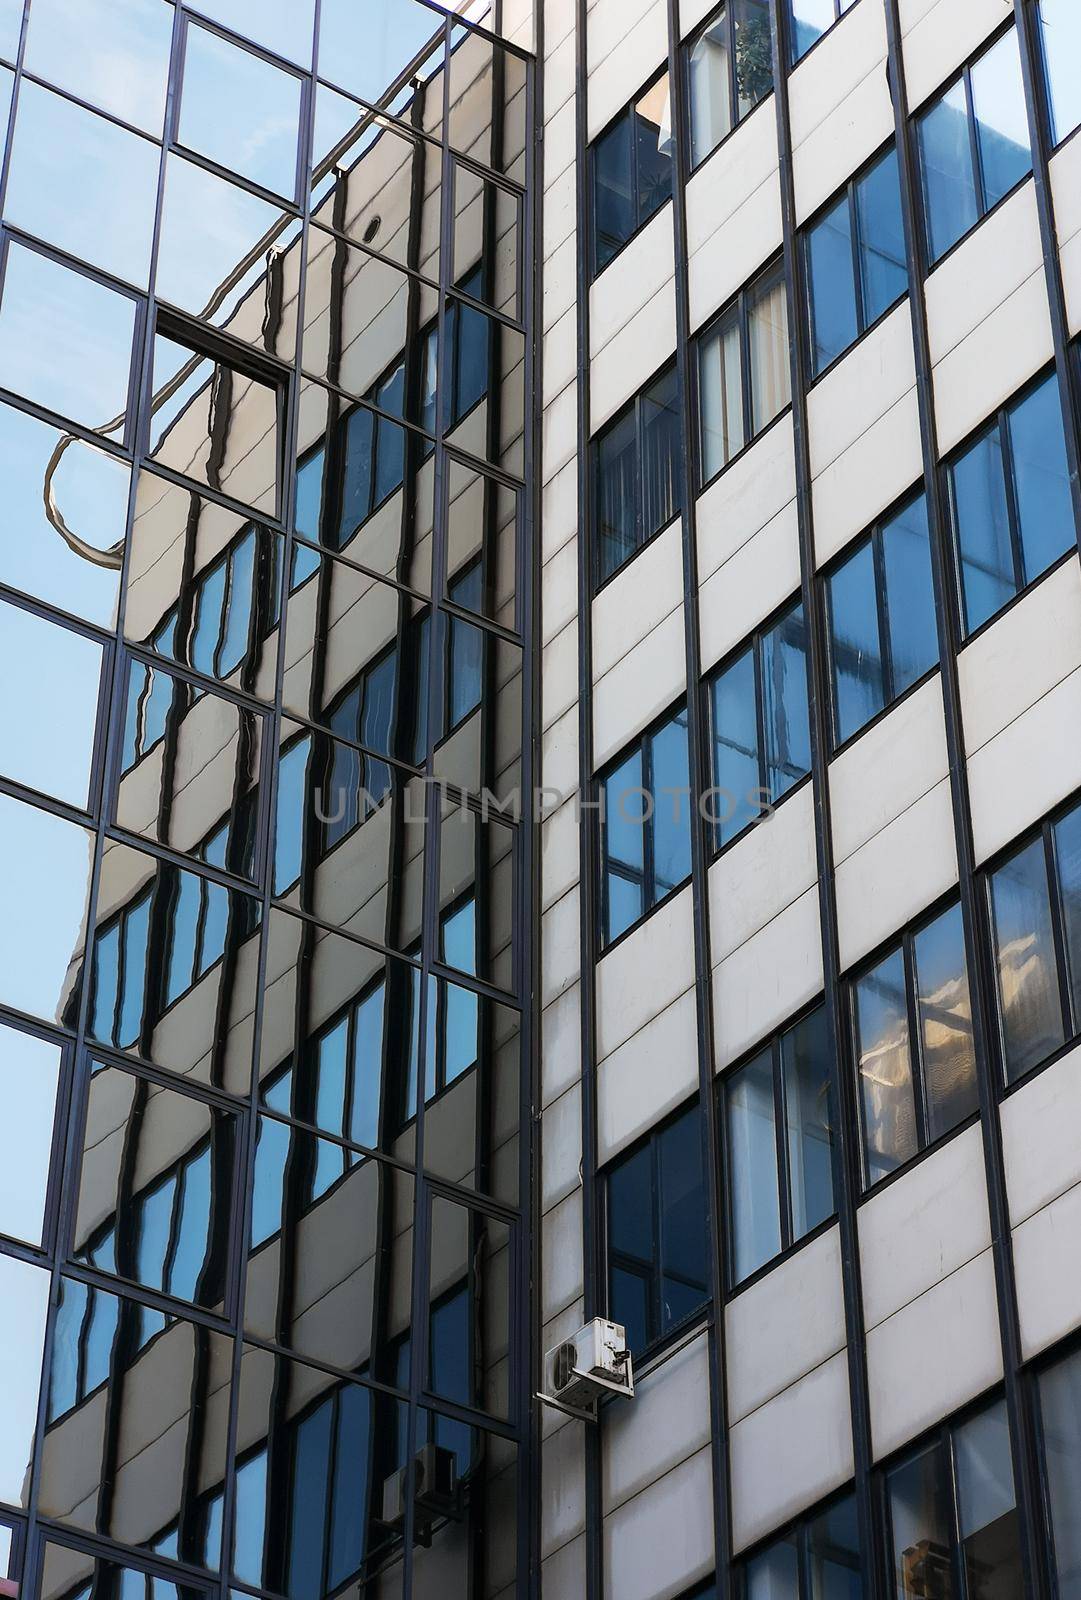 Looking up to facade of building reflecting in windows